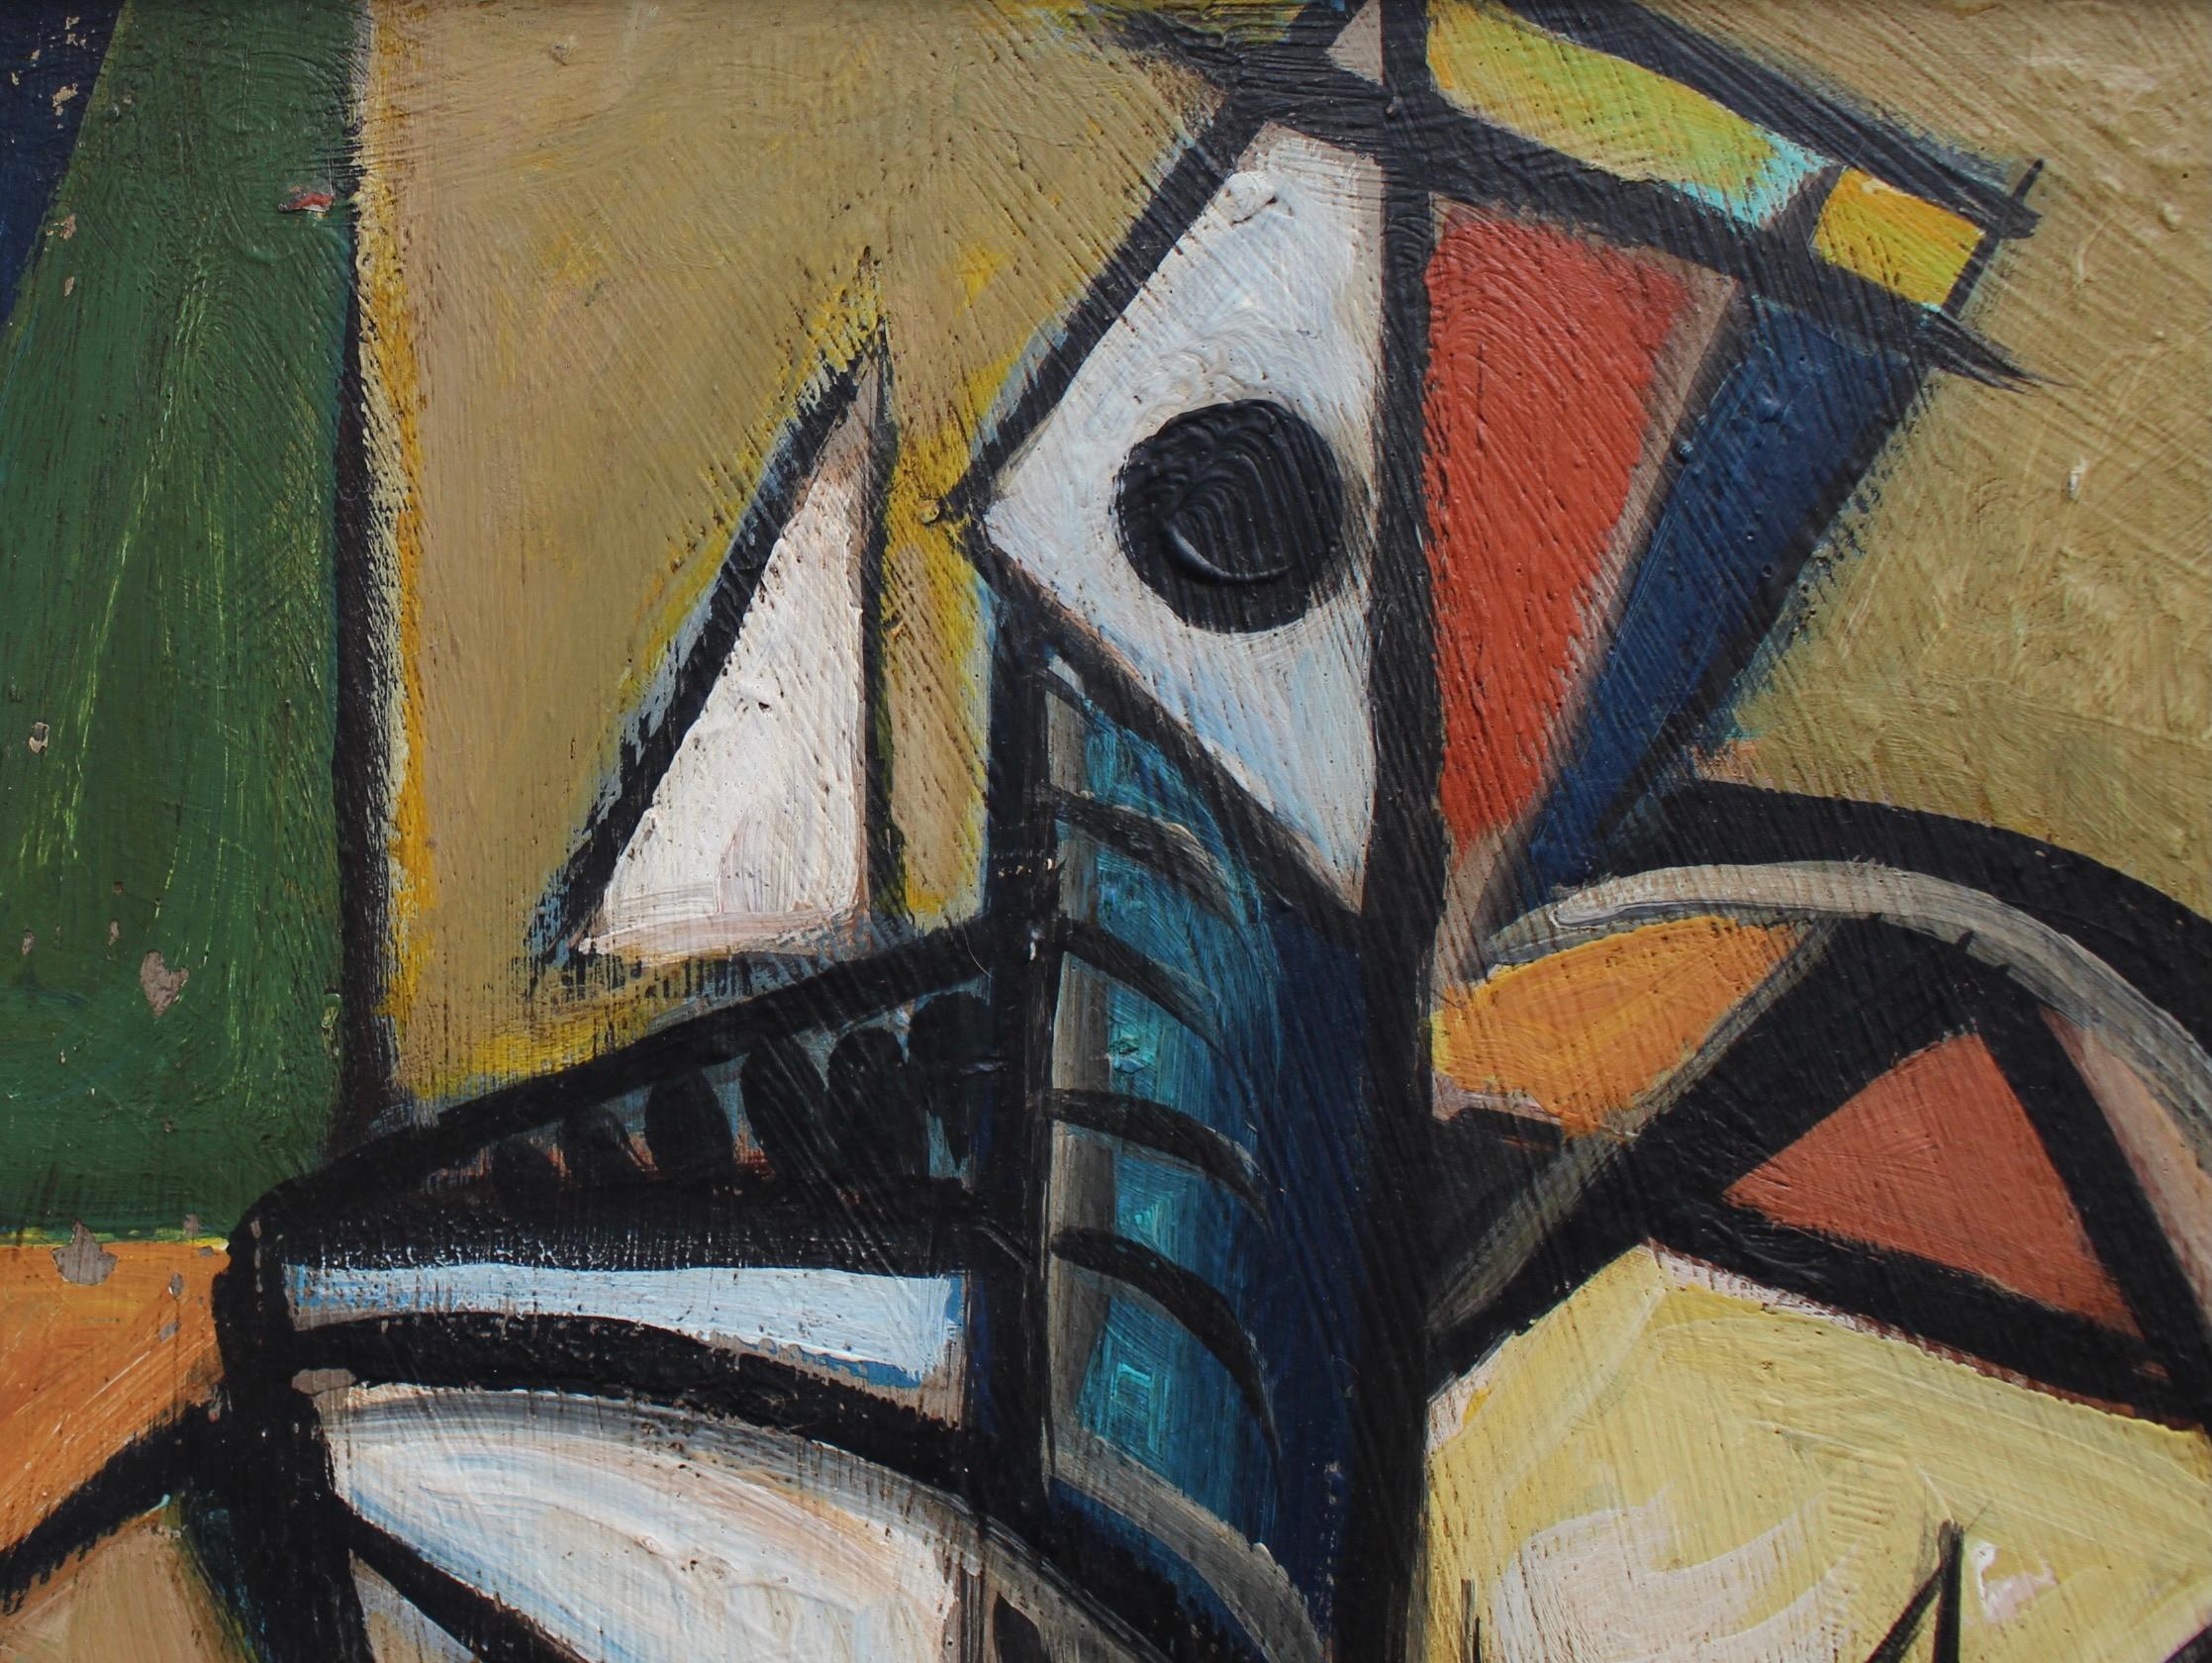 'Cubist Abstraction', oil on board, Berlin School (circa 1960s). An extraordinary Modern work by an artist with the initials GH. Clearly inspired by Picasso and Braque, the artists use angles, lines and vibrant colours to create an entirely new